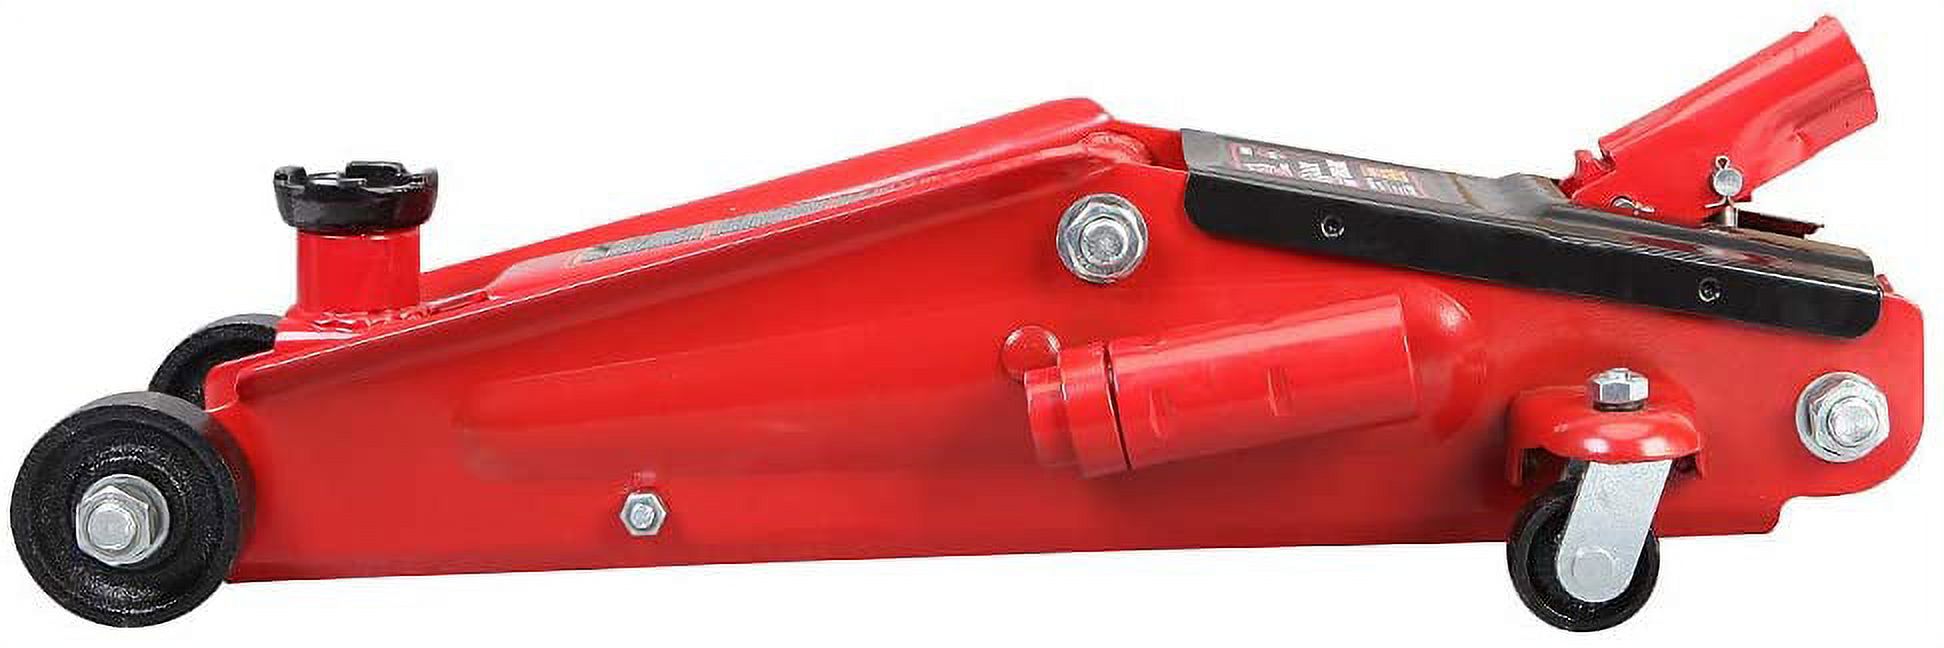 Big Red Ton Hydraulic Trolley Service/Floor Jack with Extra Saddle, Fits  SUVs and Trucks, Red, W8306